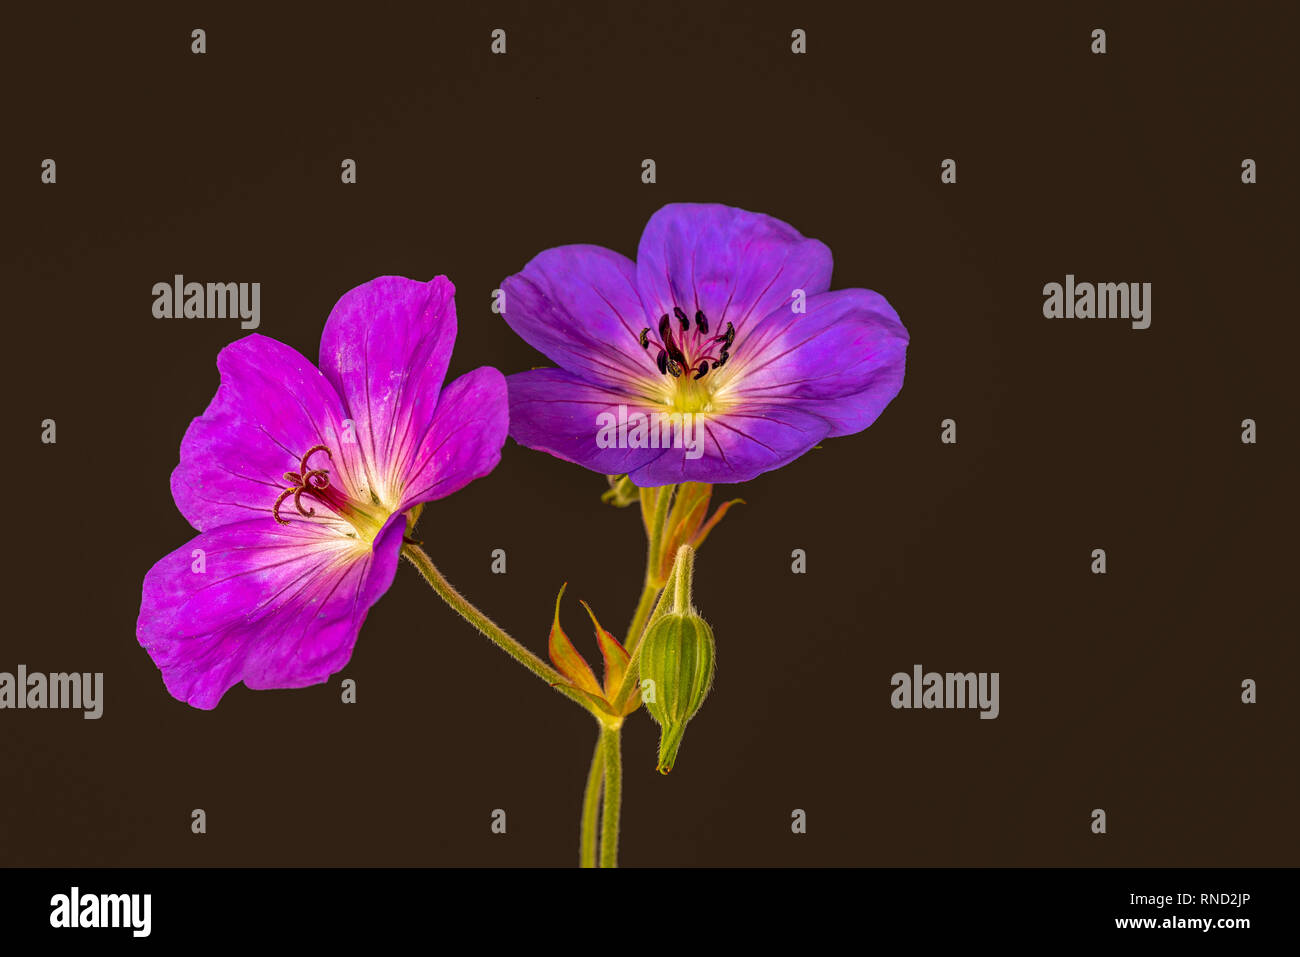 Fine art still life color floral image of a pair of pink violet isolated wide open male and female geranium/cranesbill blossoms,brown background Stock Photo